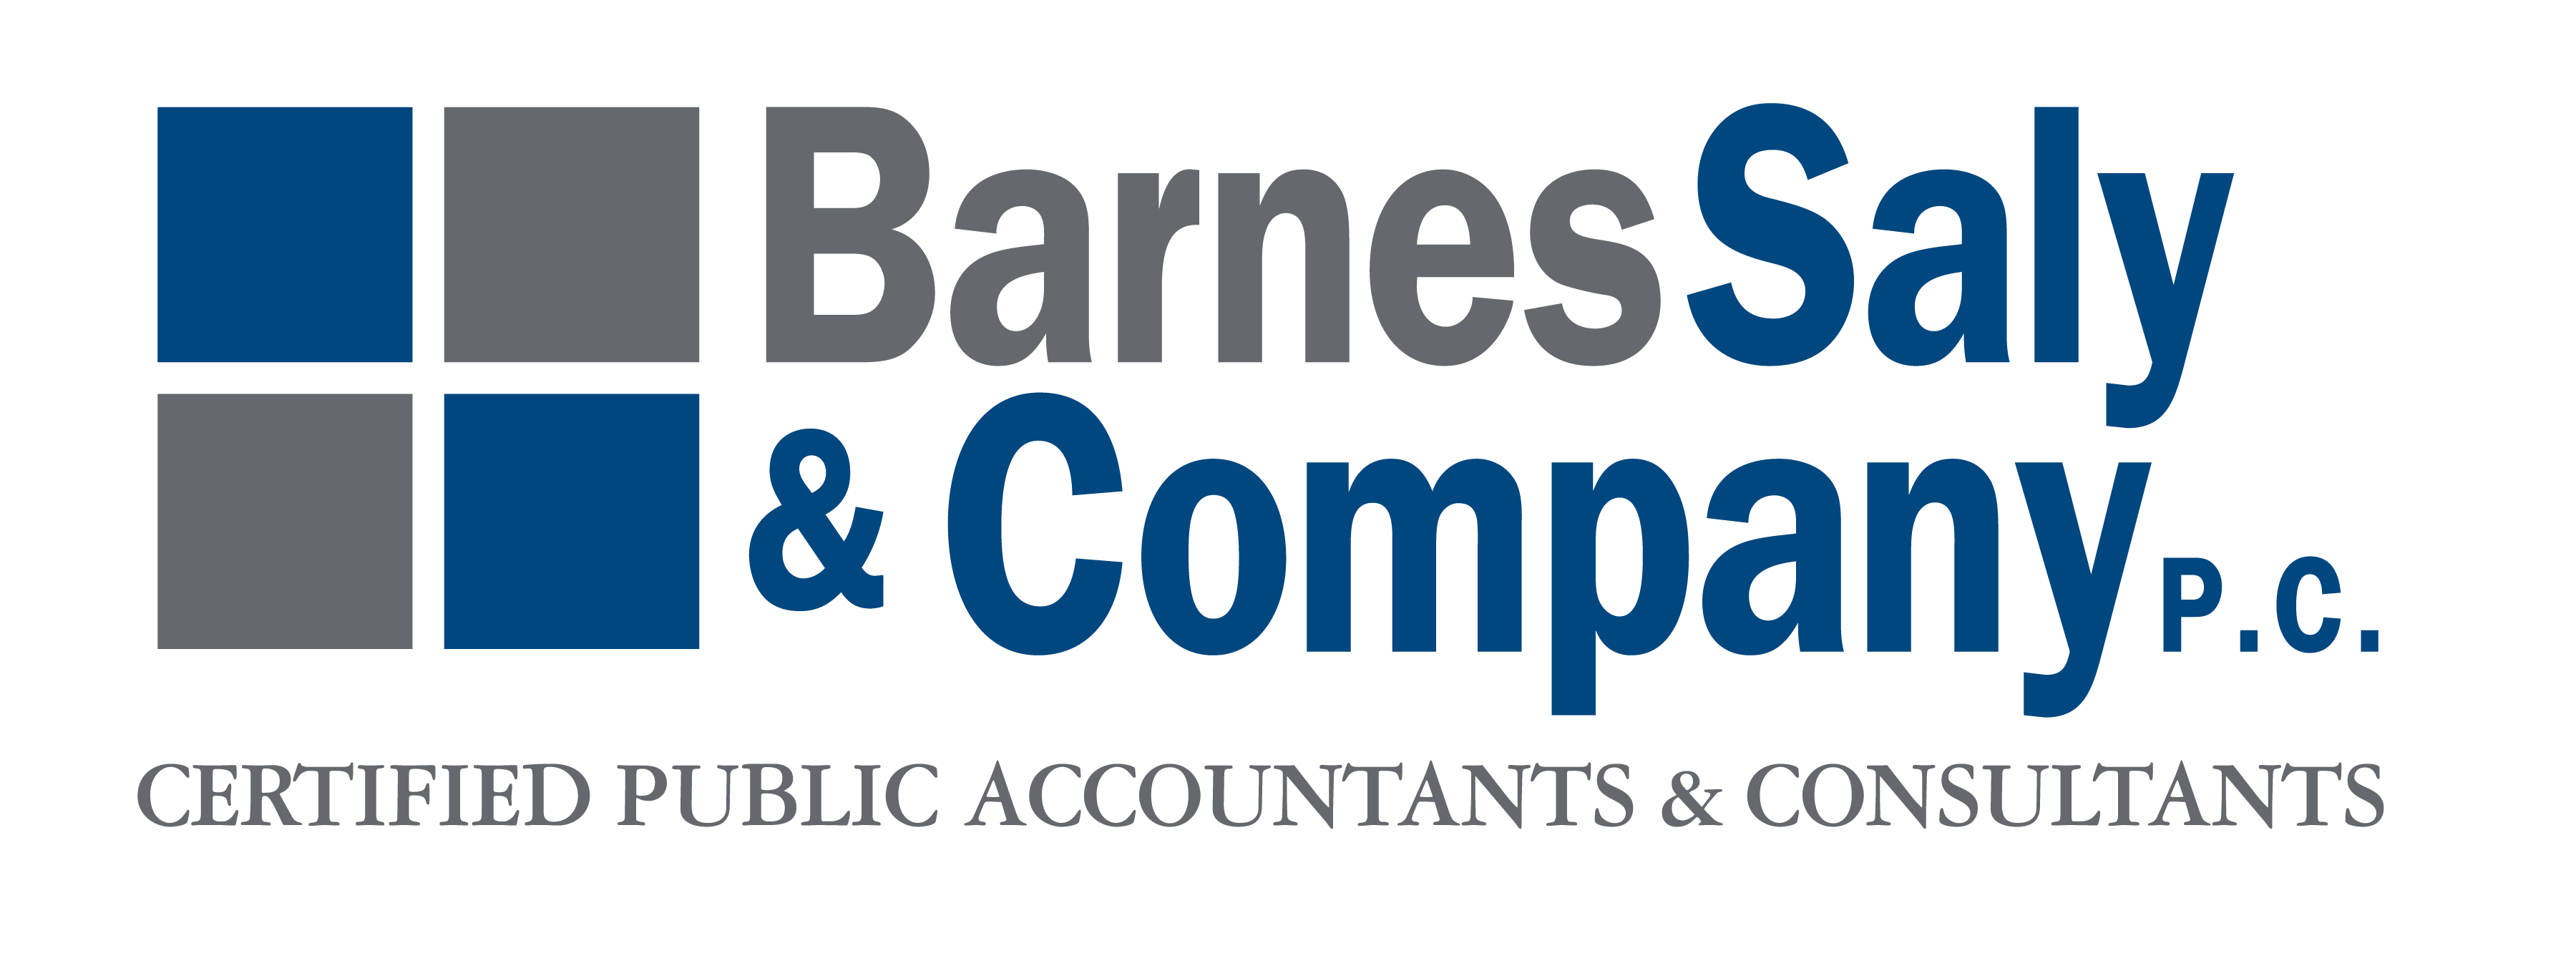 Little Known Company Logo - Little-Known Tactic Increases Child Care Credit | Barnes Saly ...